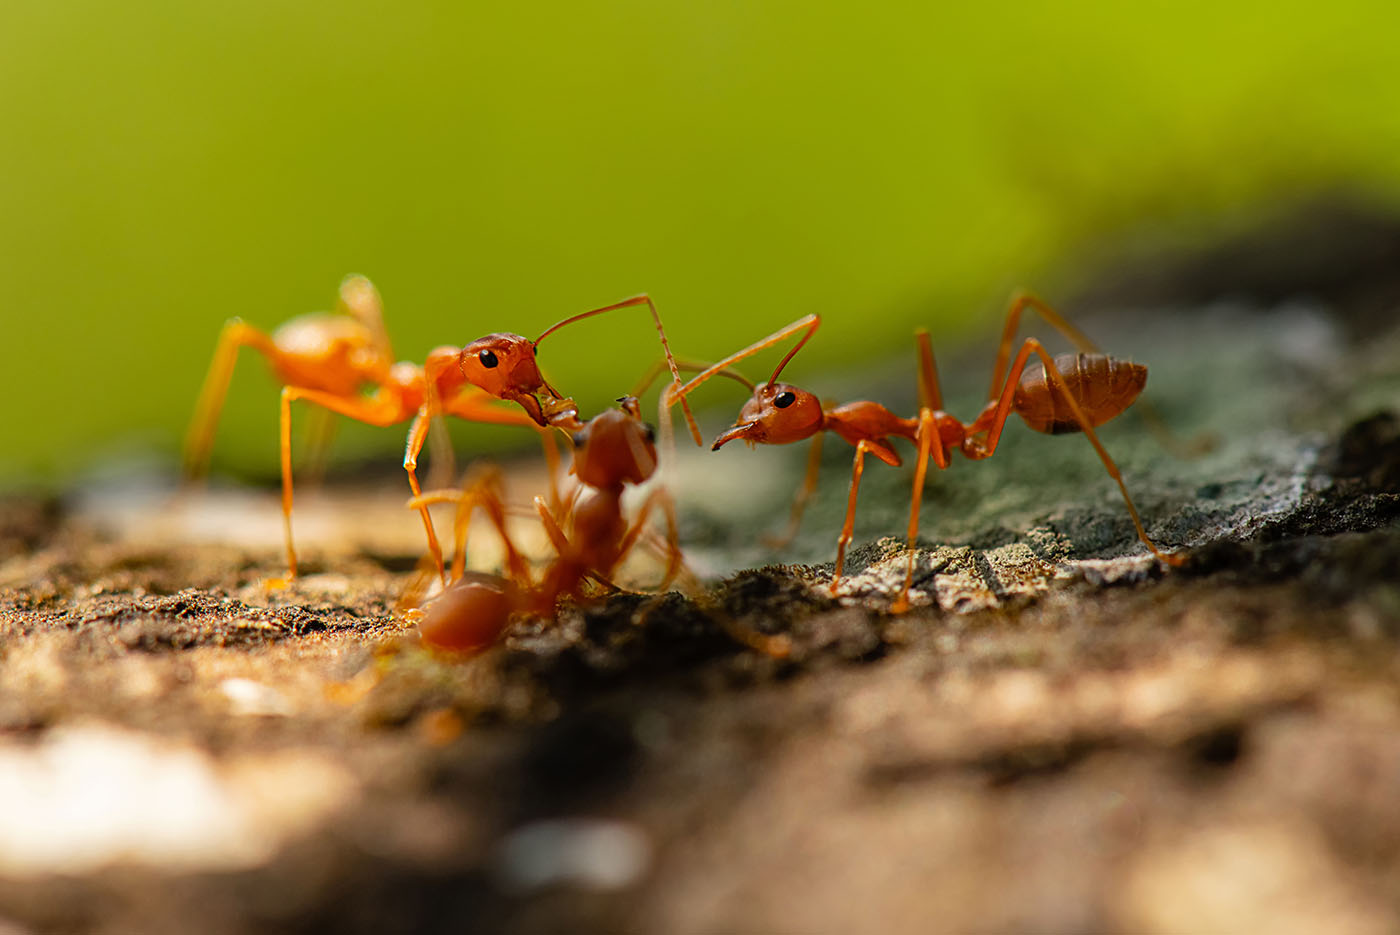 A group of ants on a log - experience the best ant control in Waco, TX with GGA Pest Management.